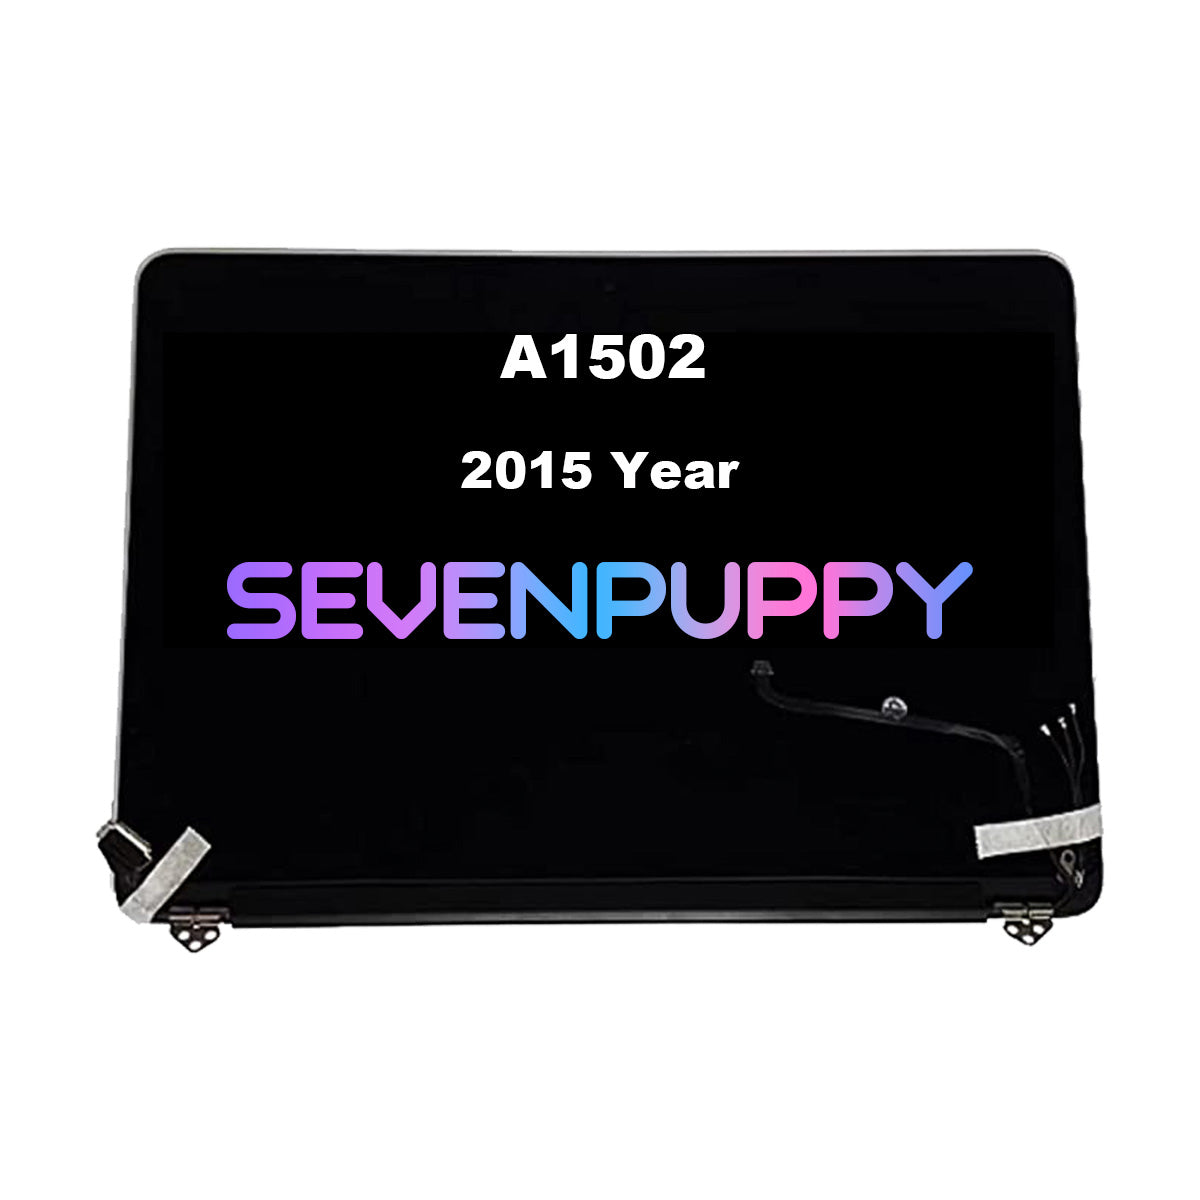 SEVEN PUPPY Brand NEW For MacBook Pro 13“ A1502 2015 Year Retina Full LCD Display Screen Assembly Replacement